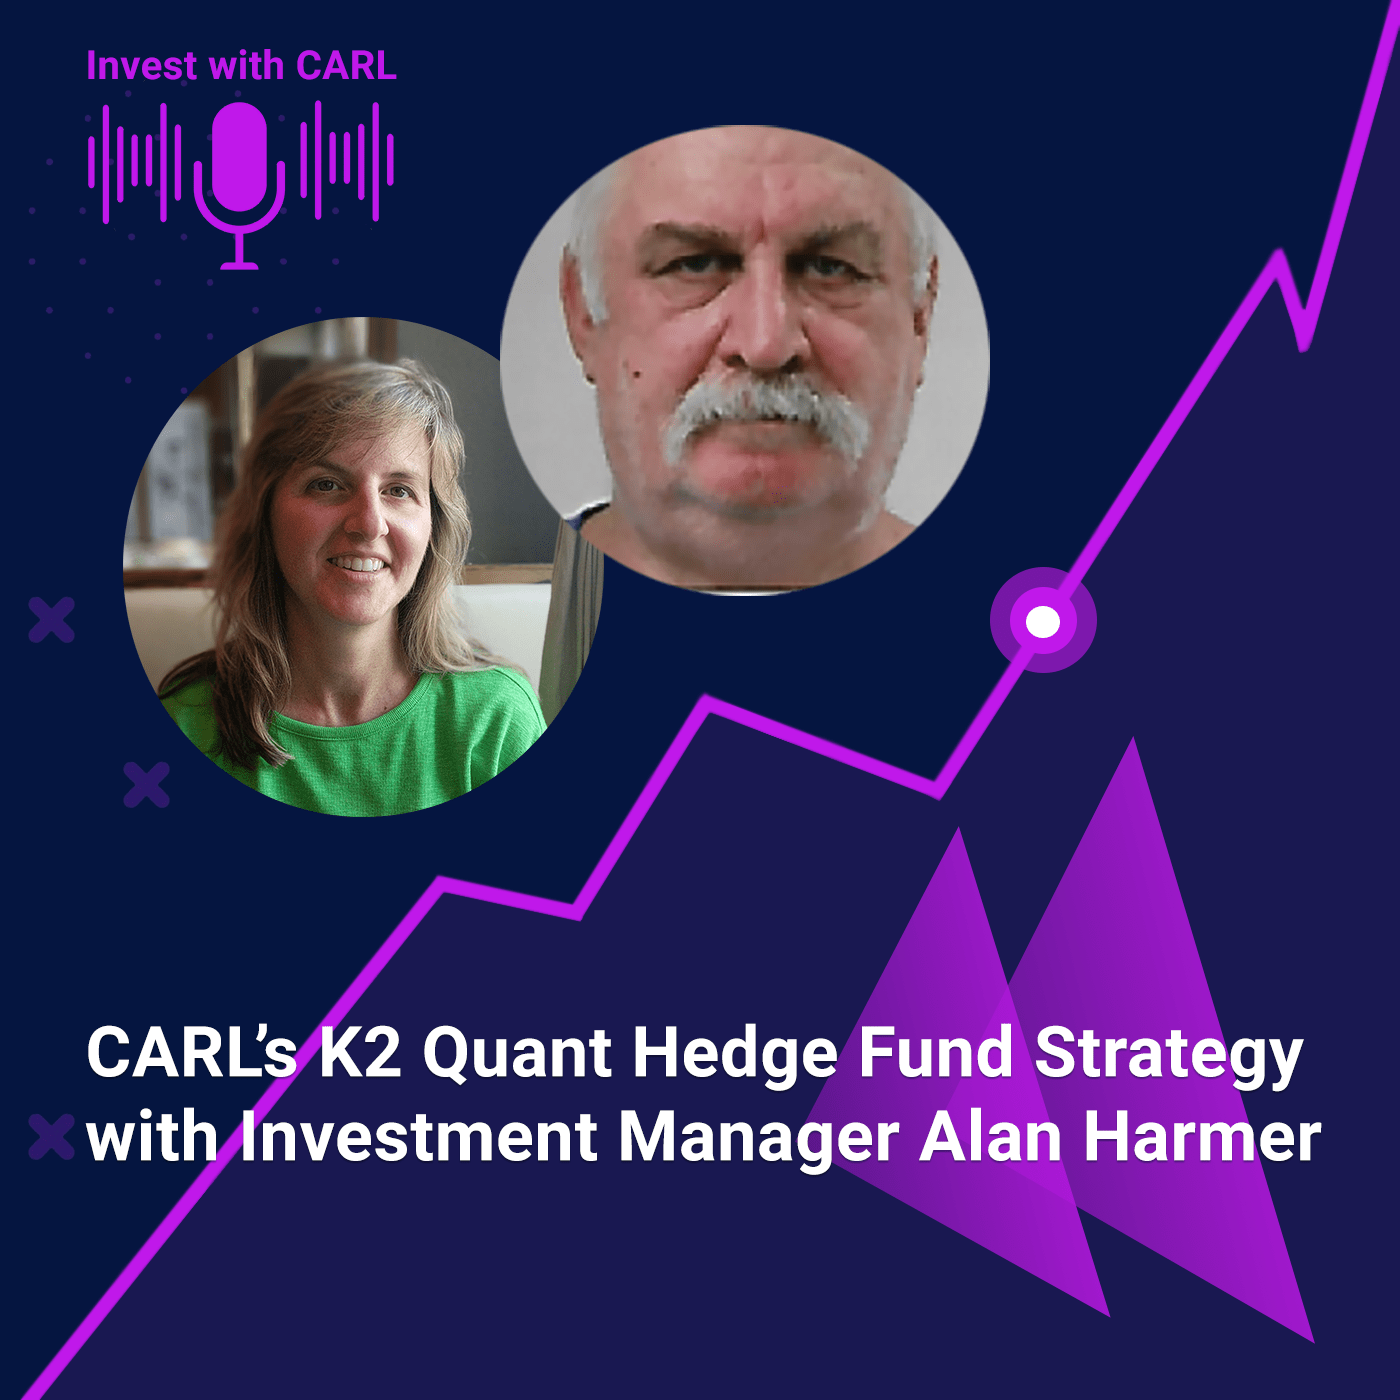 CARL’s K2 Quant Hedge Fund Strategy with Investment Manager Alan Harmer